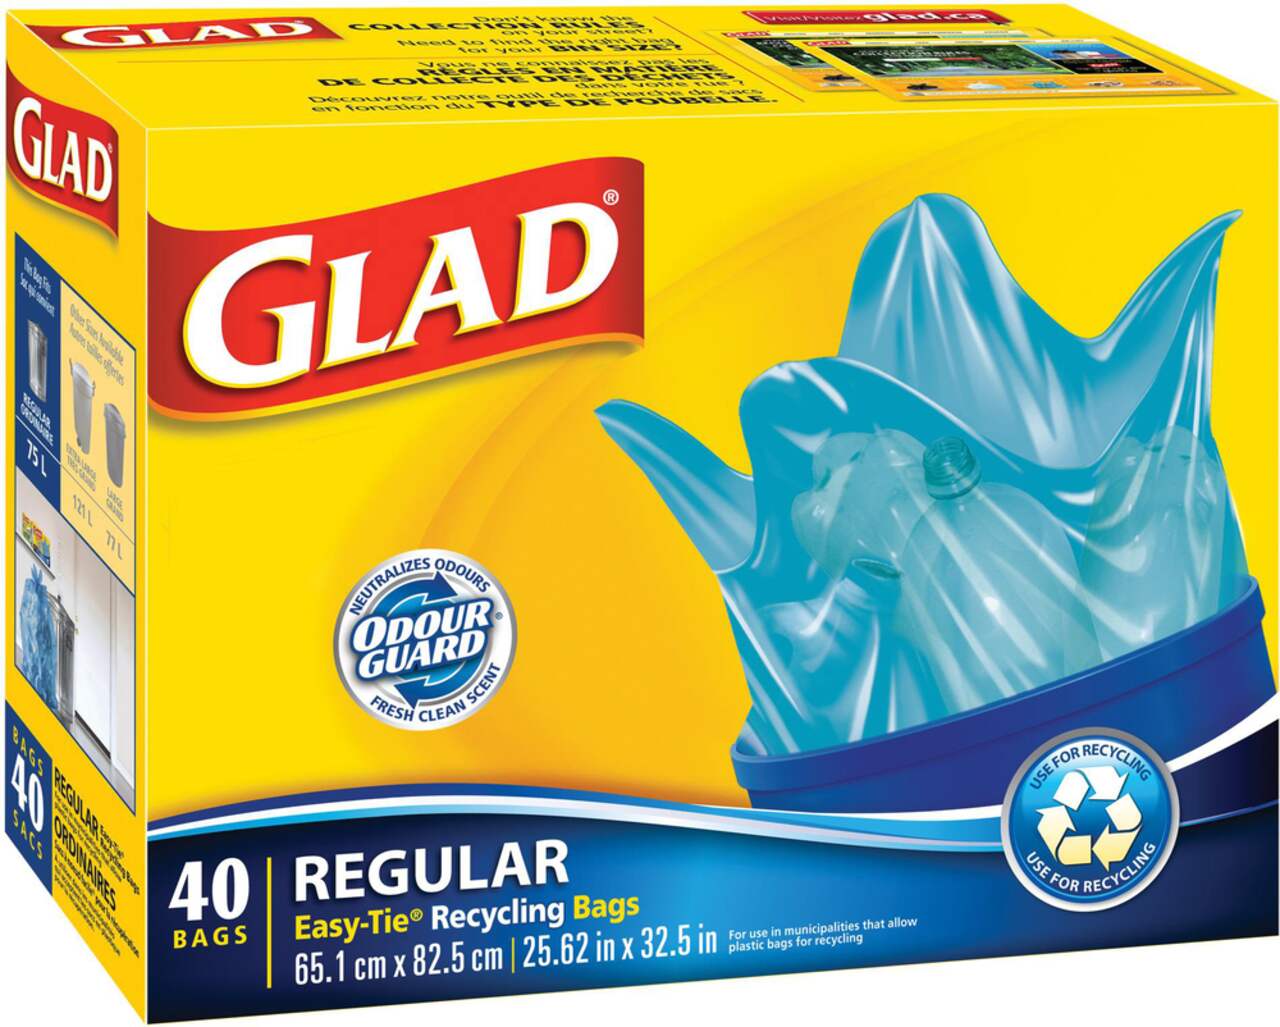 https://media-www.canadiantire.ca/product/living/cleaning/refuse-bags/0429824/glad-recycling-bags-40pk-26x32-67l-0d828b3d-1c95-4ef1-97c9-c3a947bef62f.png?imdensity=1&imwidth=640&impolicy=mZoom